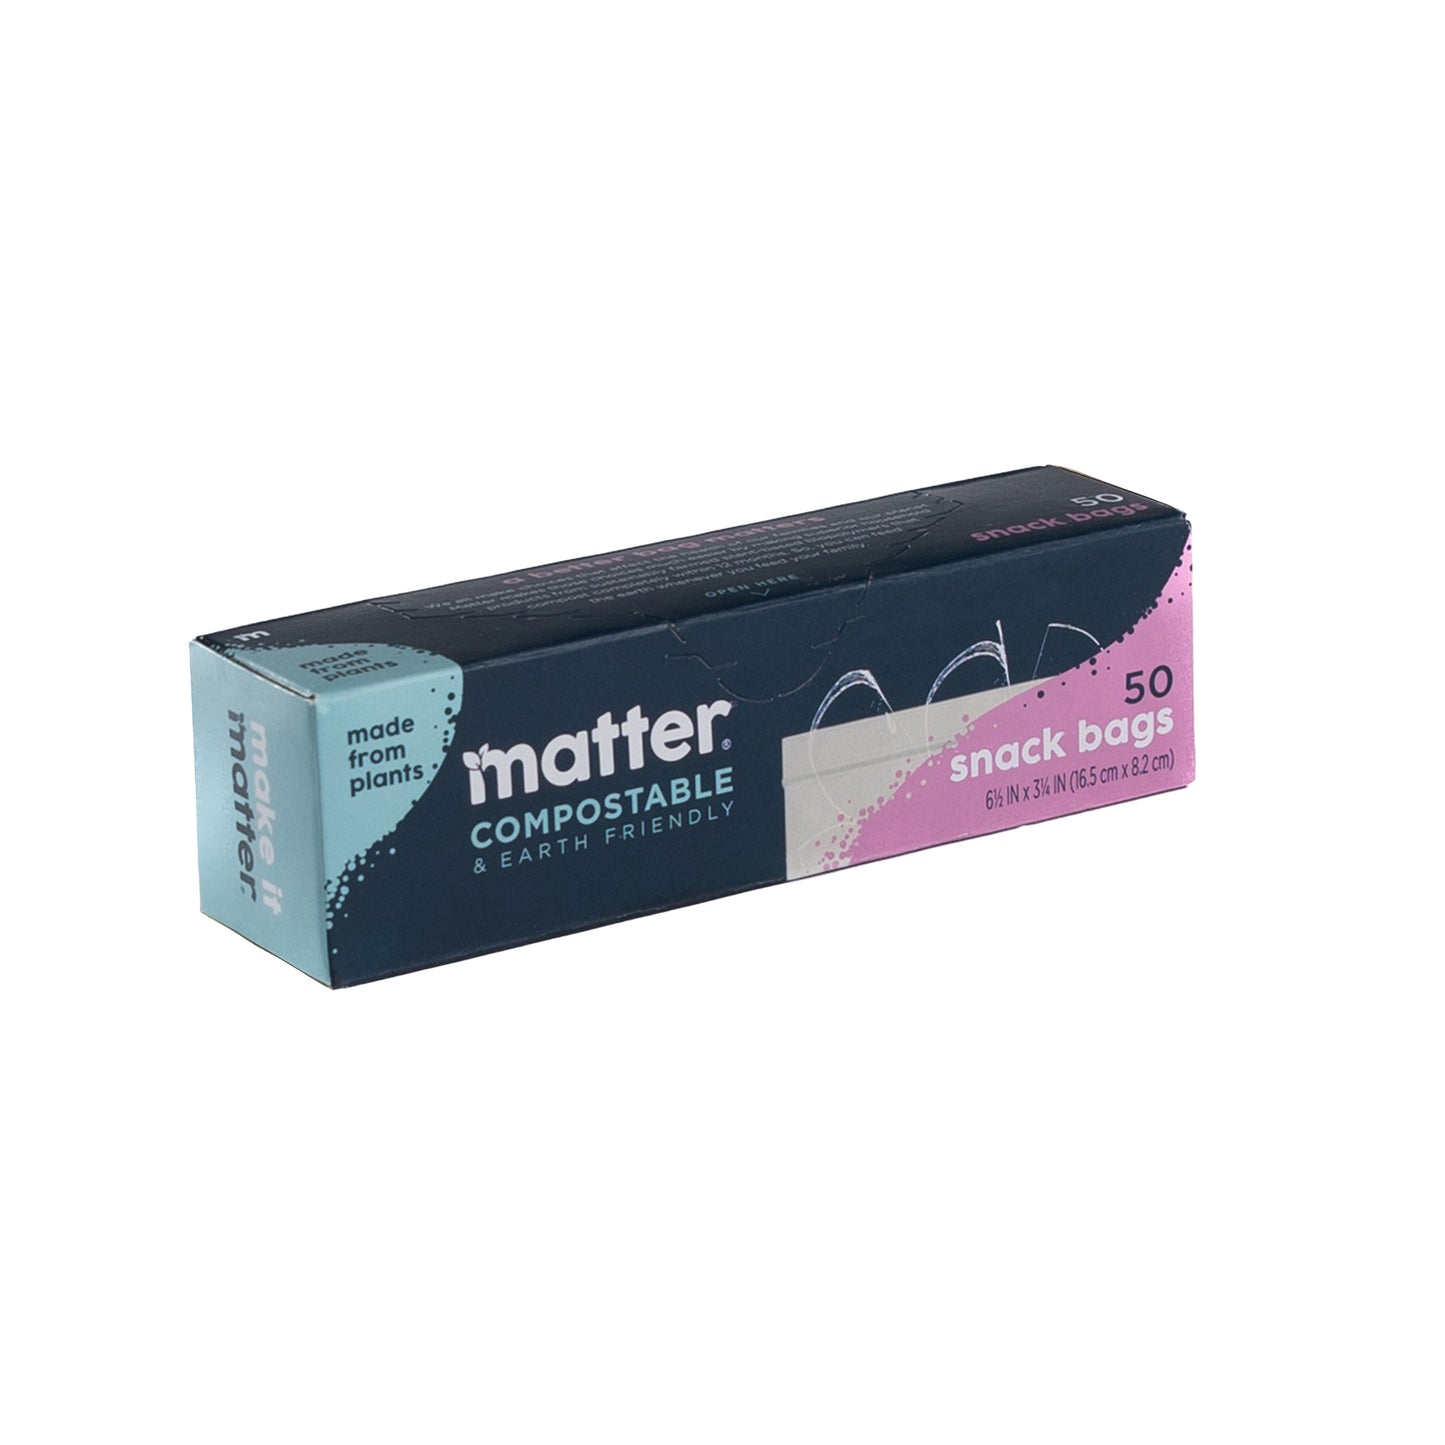 Matter Compostable Snack Bags - 50 Count